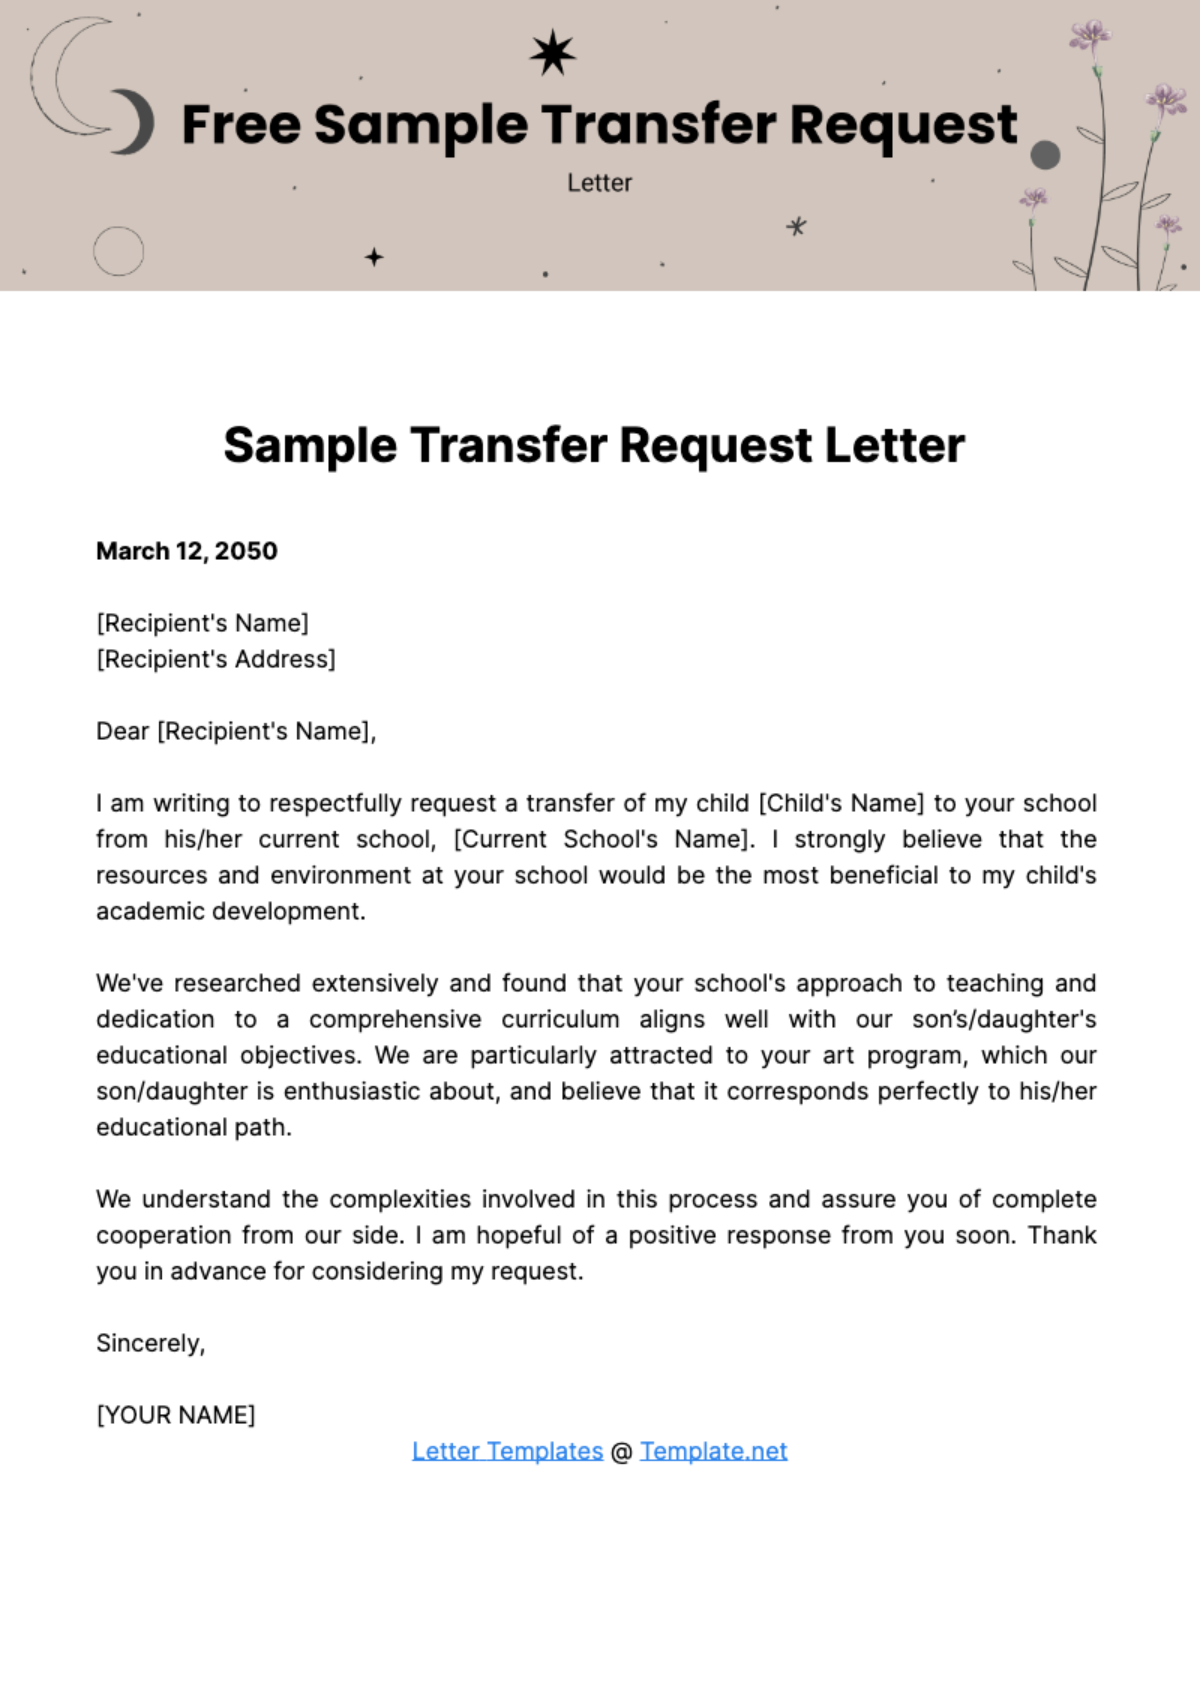 Sample Transfer Request Letter Template